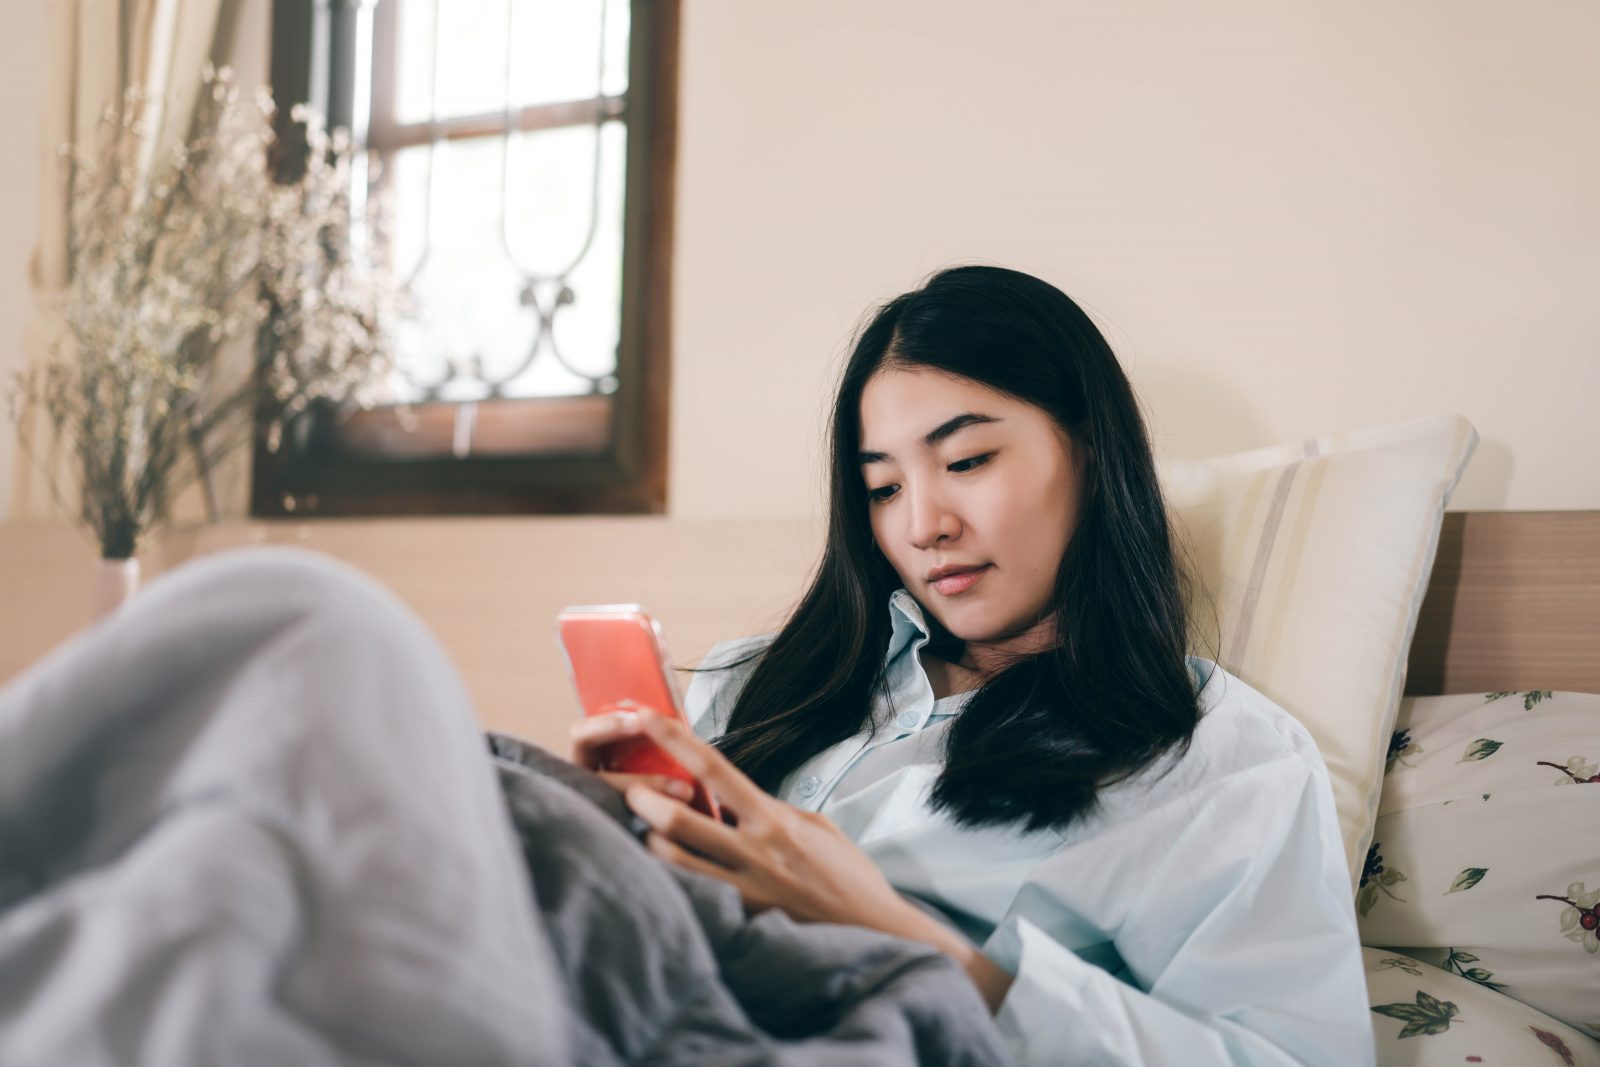 A woman sits on a bed while looking at her phone.